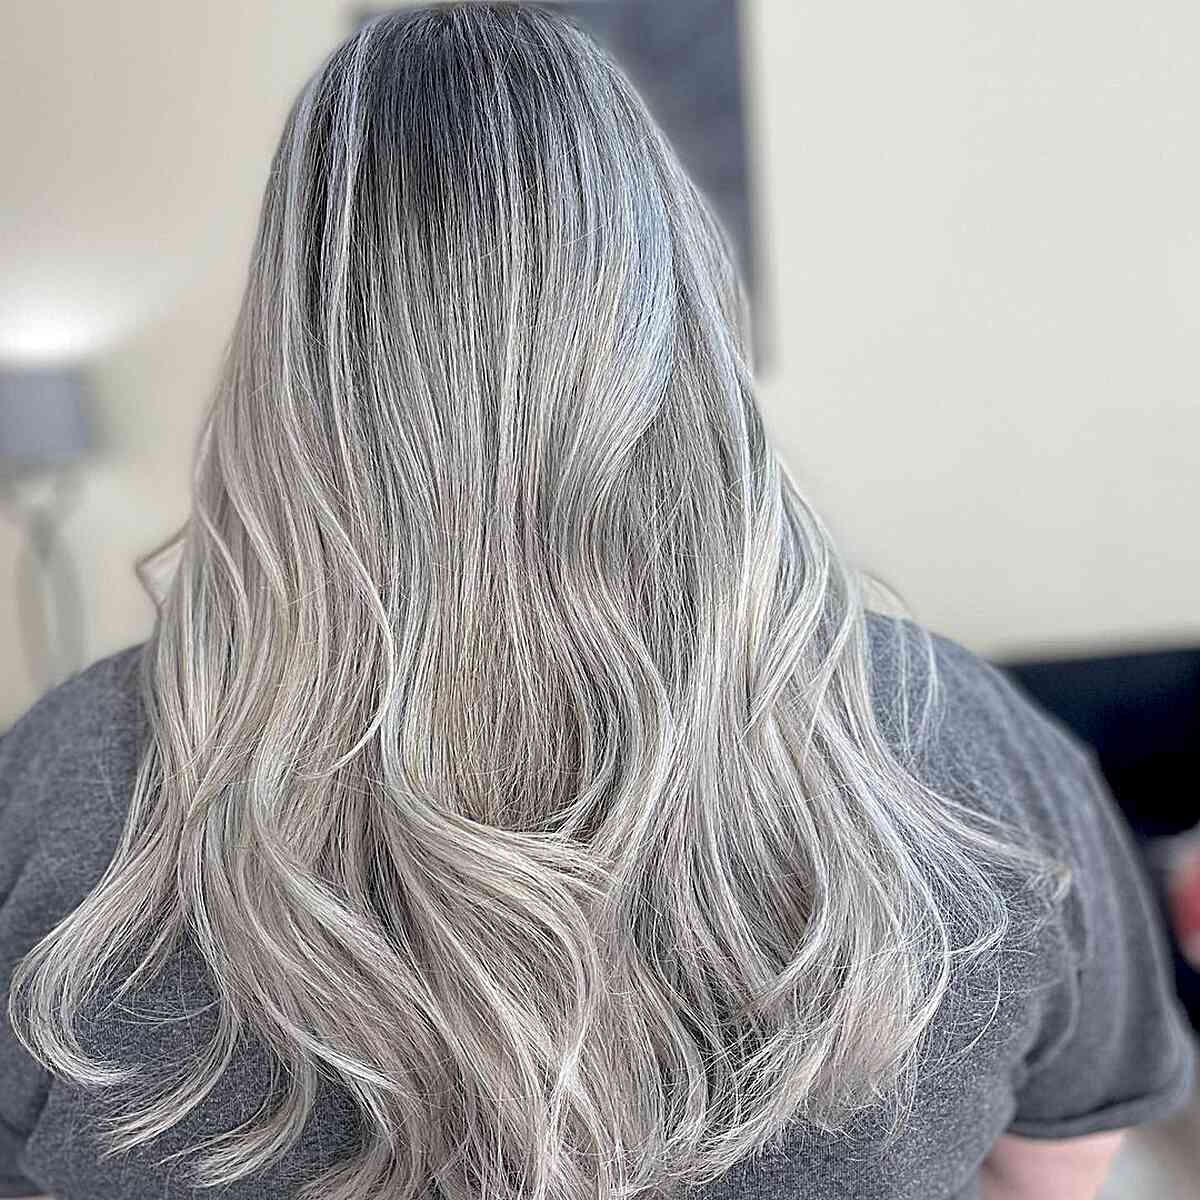 Mid Back-Length Icy Grey Blonde Balayage Hair with Dark Roots